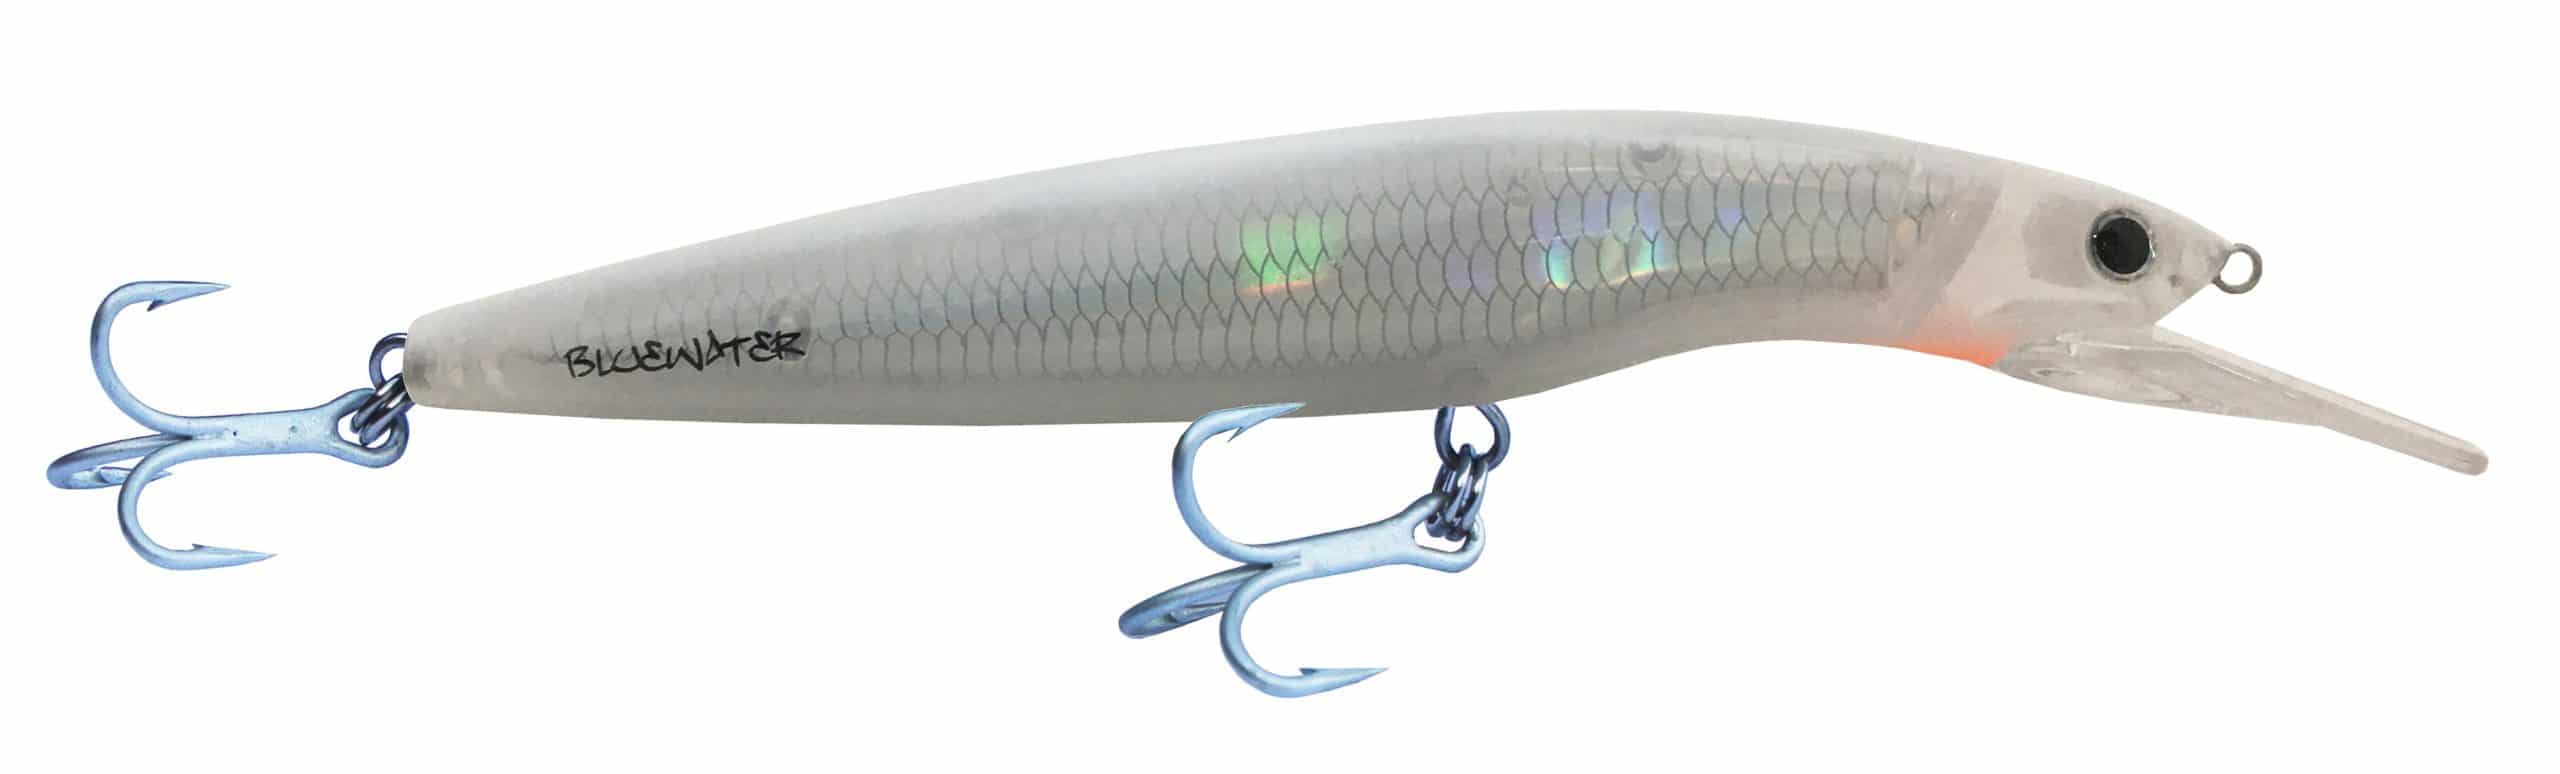 43PCS MIXED FISHING Lures Bulk Outdoor Murray Cod Freshwater Bream Minnow  Baits $49.99 - PicClick AU